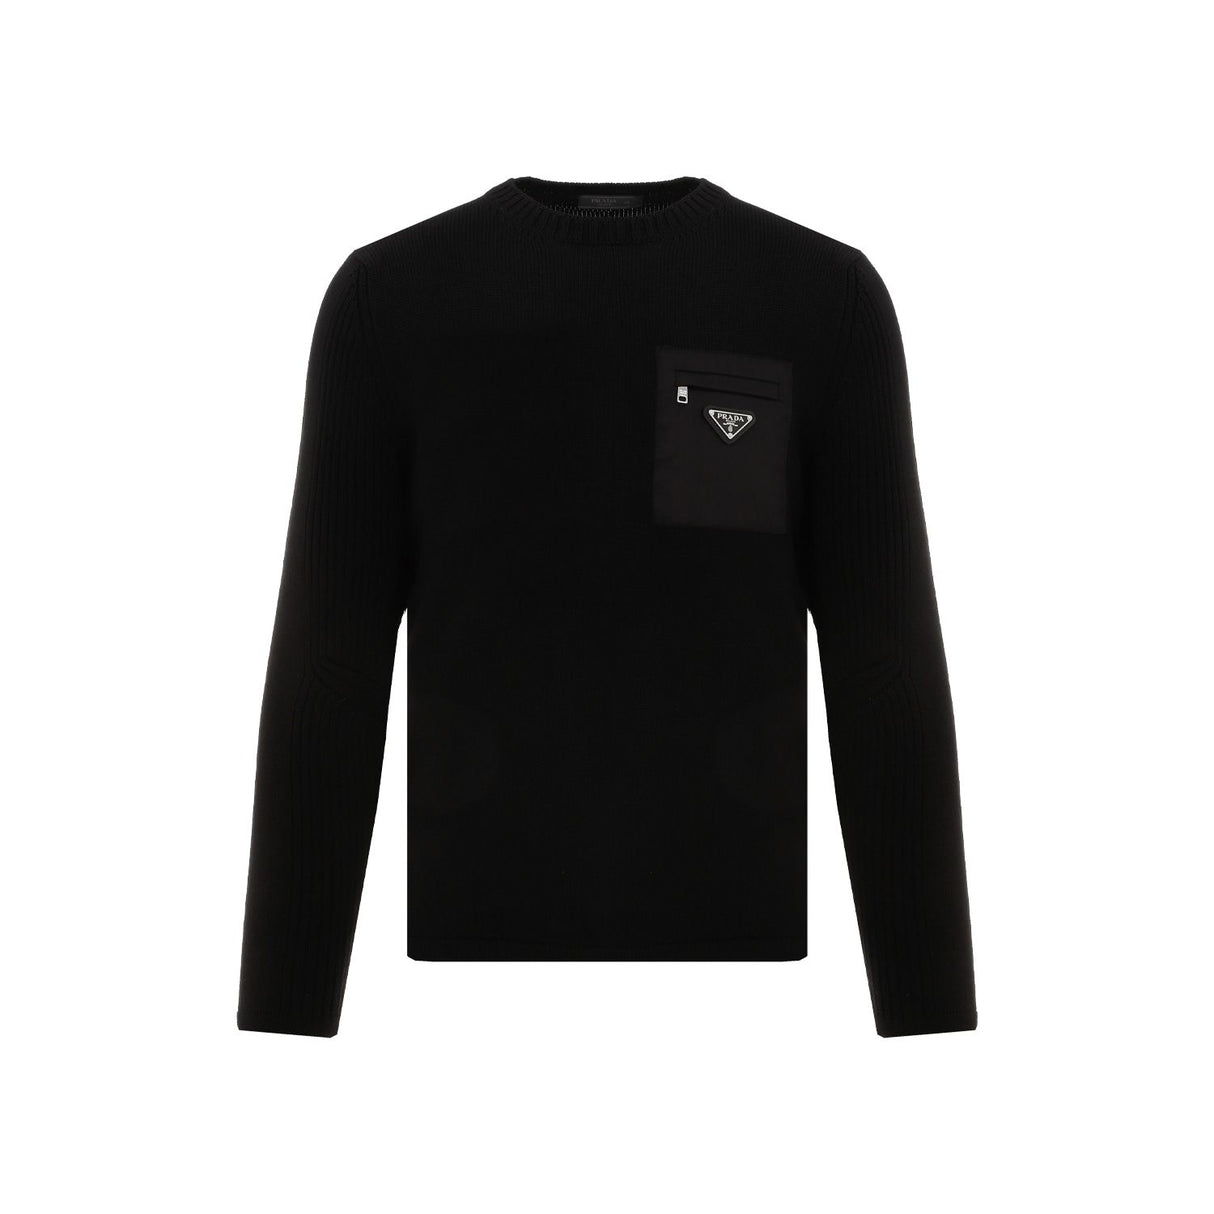 PRADA Luxurious Black Wool Sweater for Men - FW24 Collection